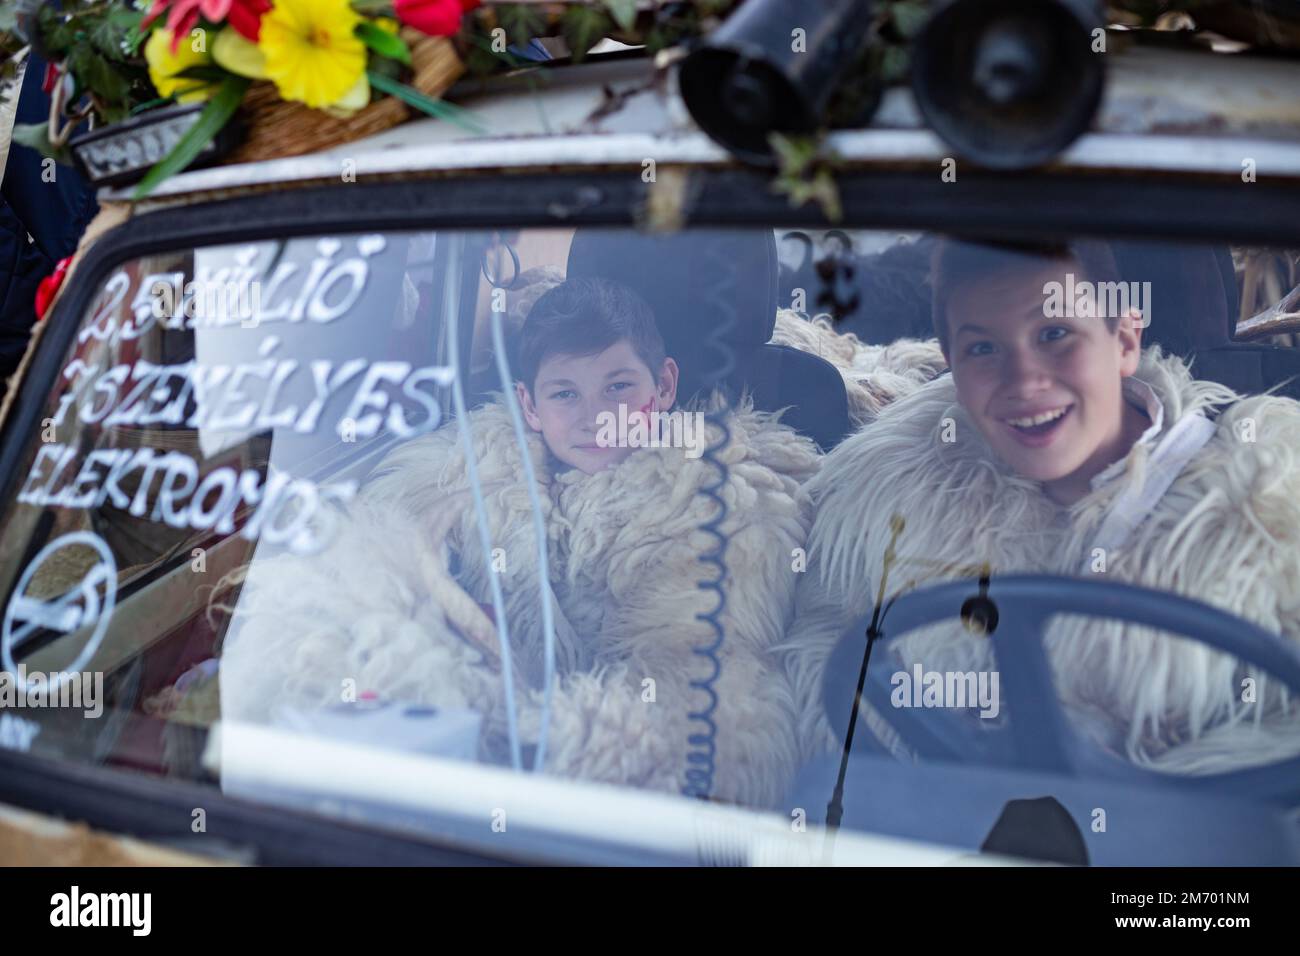 Young boys dressed as buso in a car during the annual Buso festivities / Poklade from Mohacs, Hungary Stock Photo